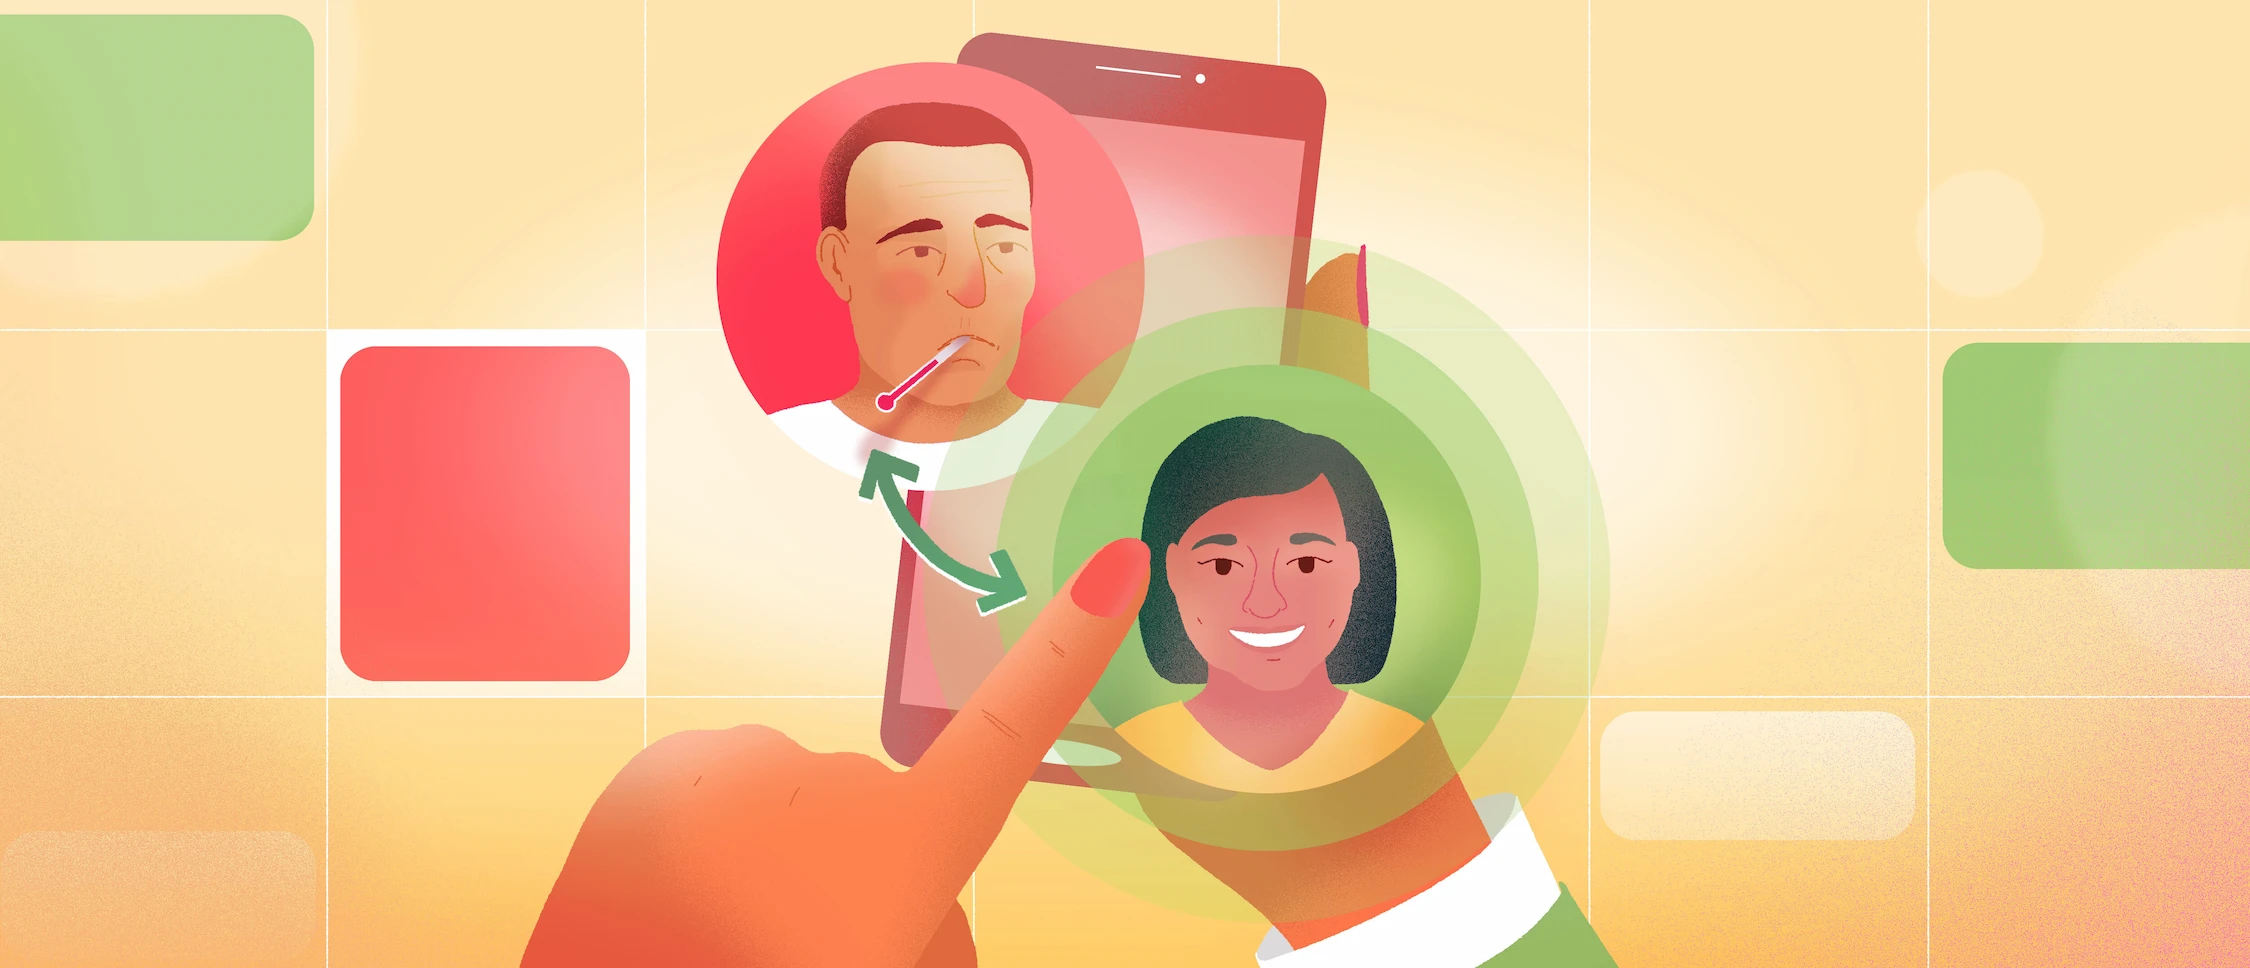 Hands holding a cell phone on which 2 faces are displayed, one with a red background and the other with a green background over which a finger slides.